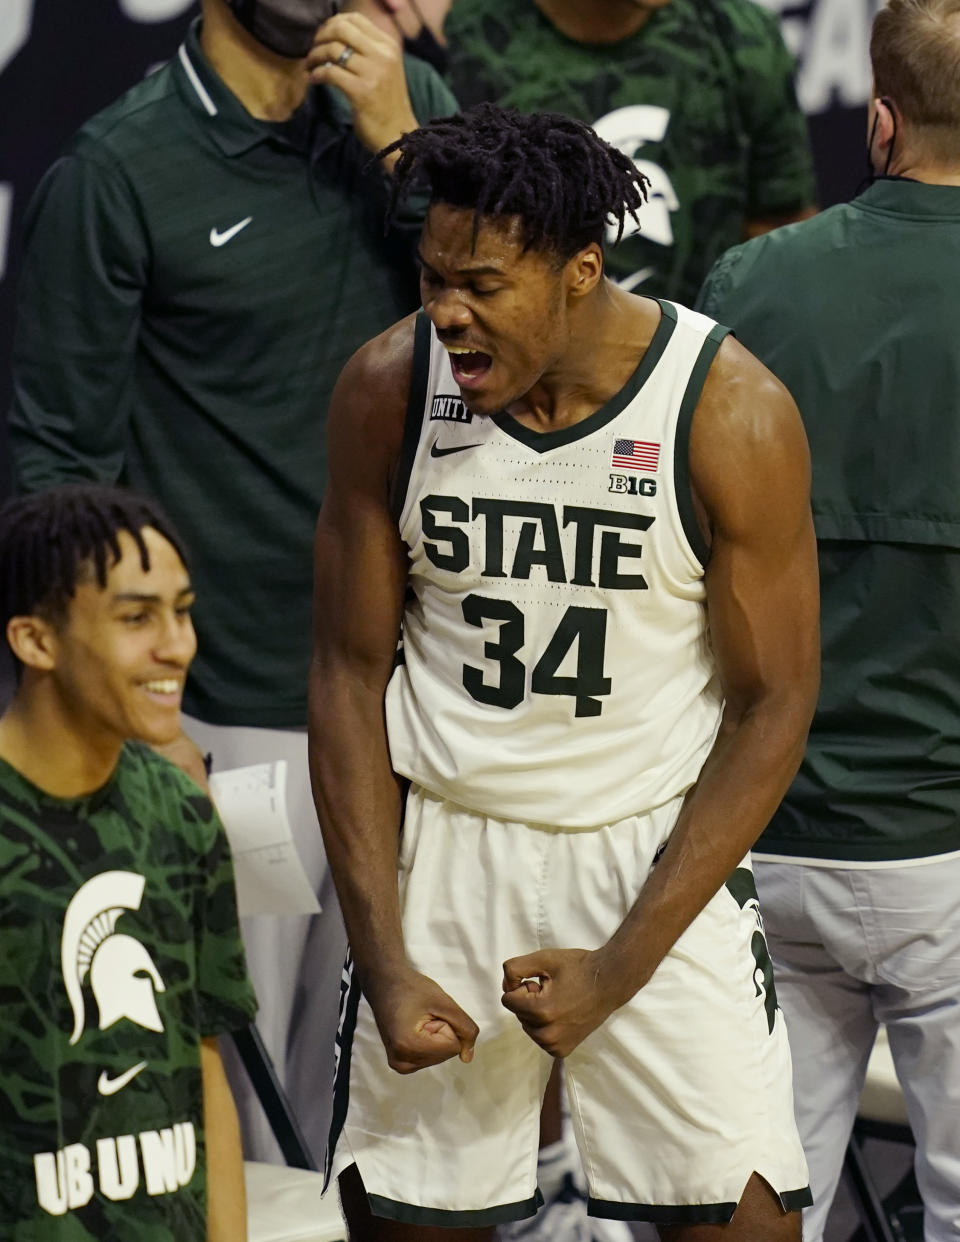 Michigan State forward Julius Marble II reacts after a play from a teammate during the second half of an NCAA college basketball game against Michigan, Sunday, March 7, 2021, in East Lansing, Mich. (AP Photo/Carlos Osorio)